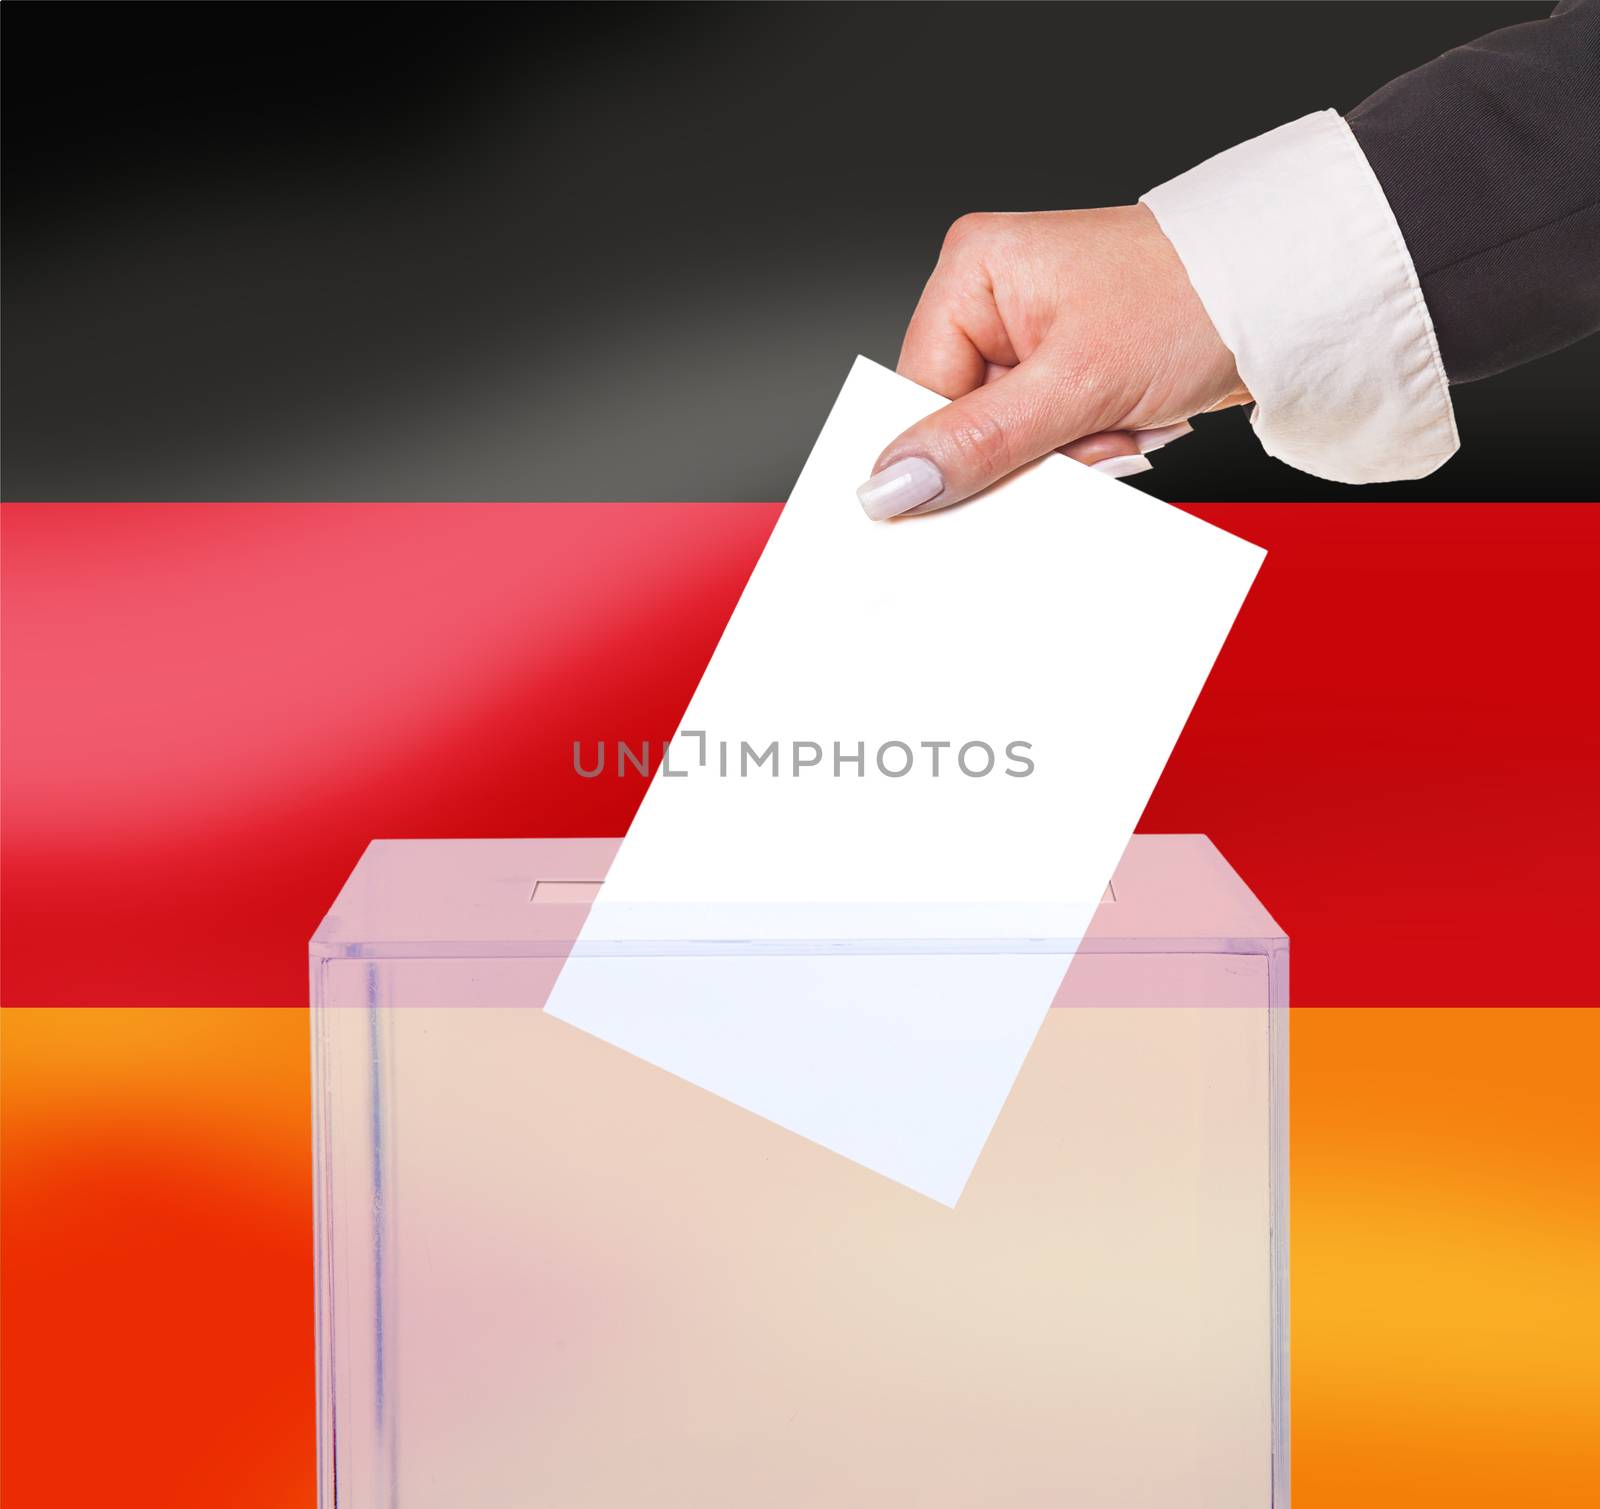 electoral vote by ballot, under the Germany flag